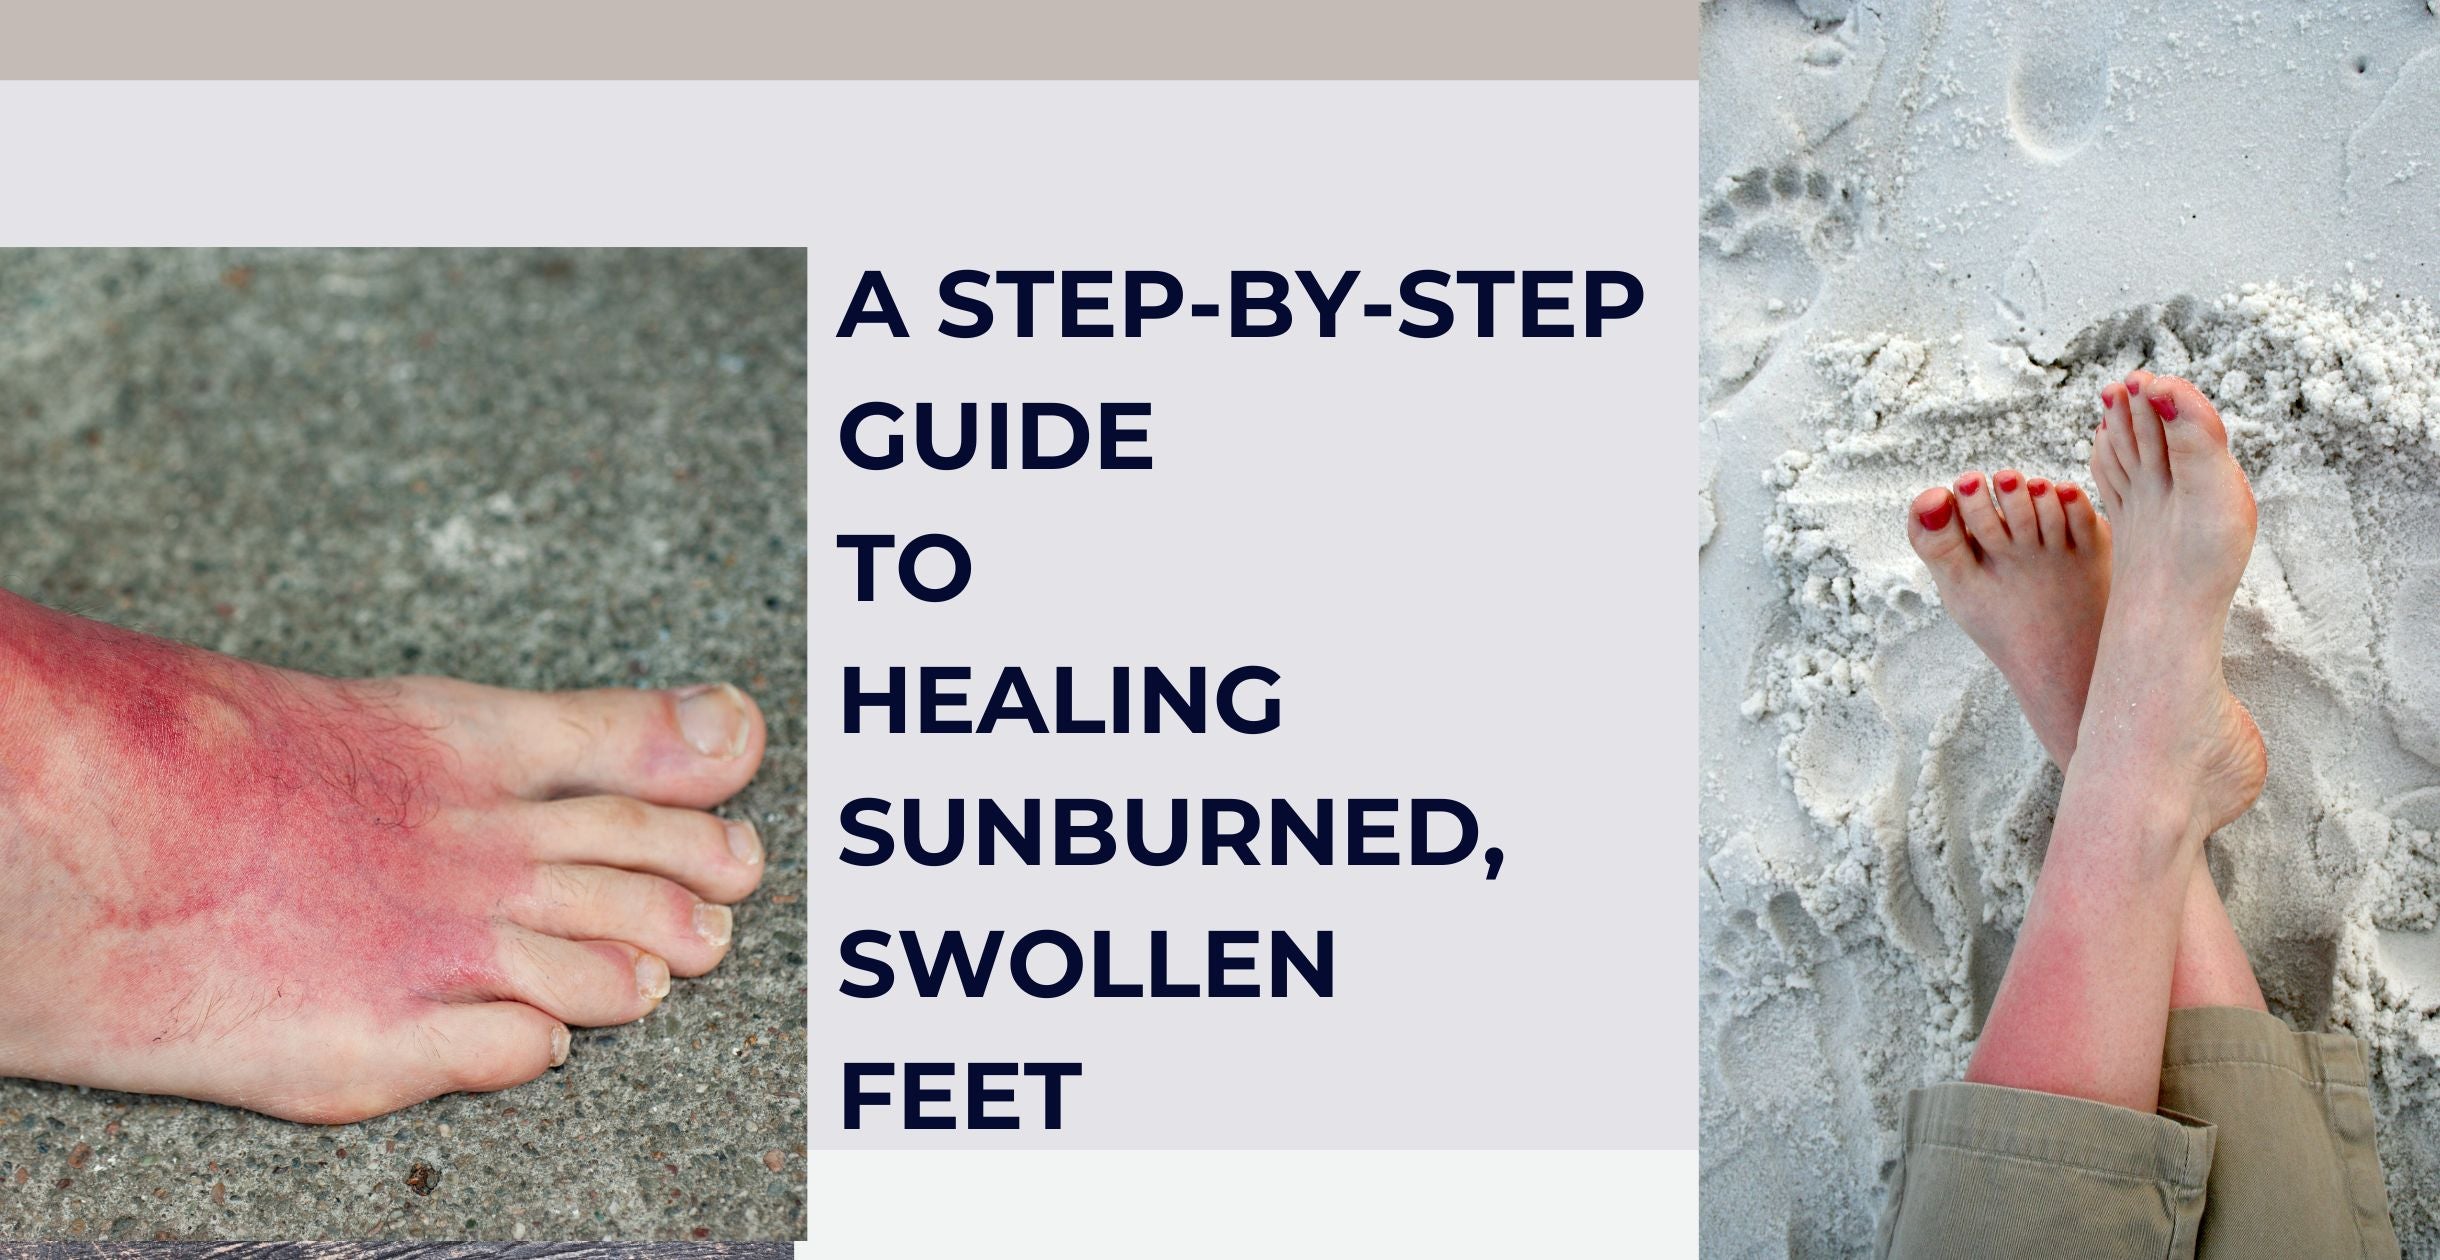 A Step-by-Step Guide to Healing Sunburned, Swollen Feet